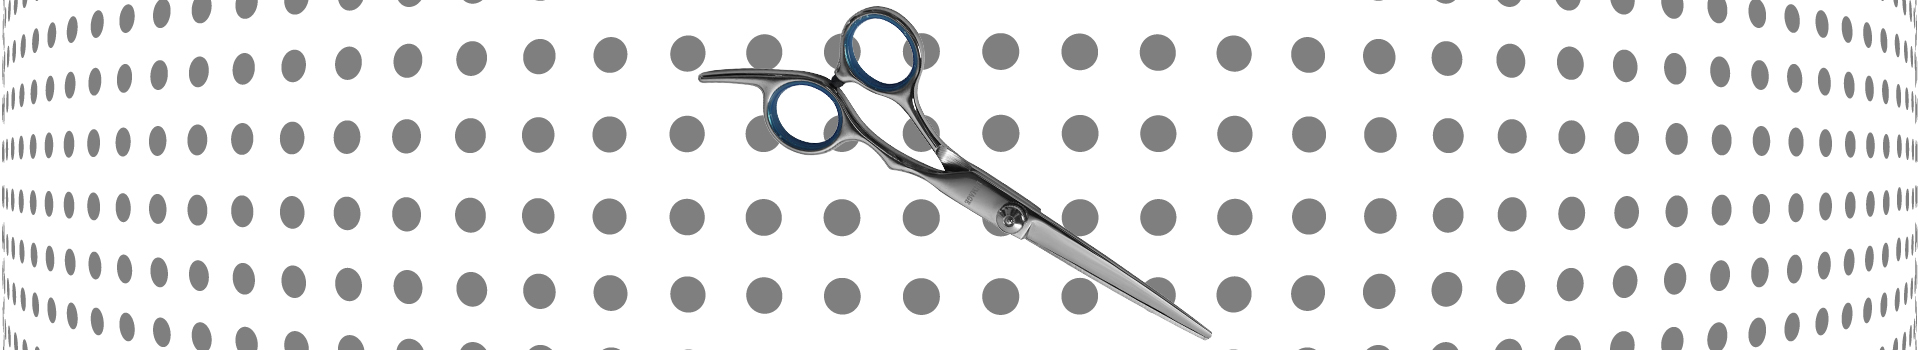 Metallic haircutting shears with offset grip